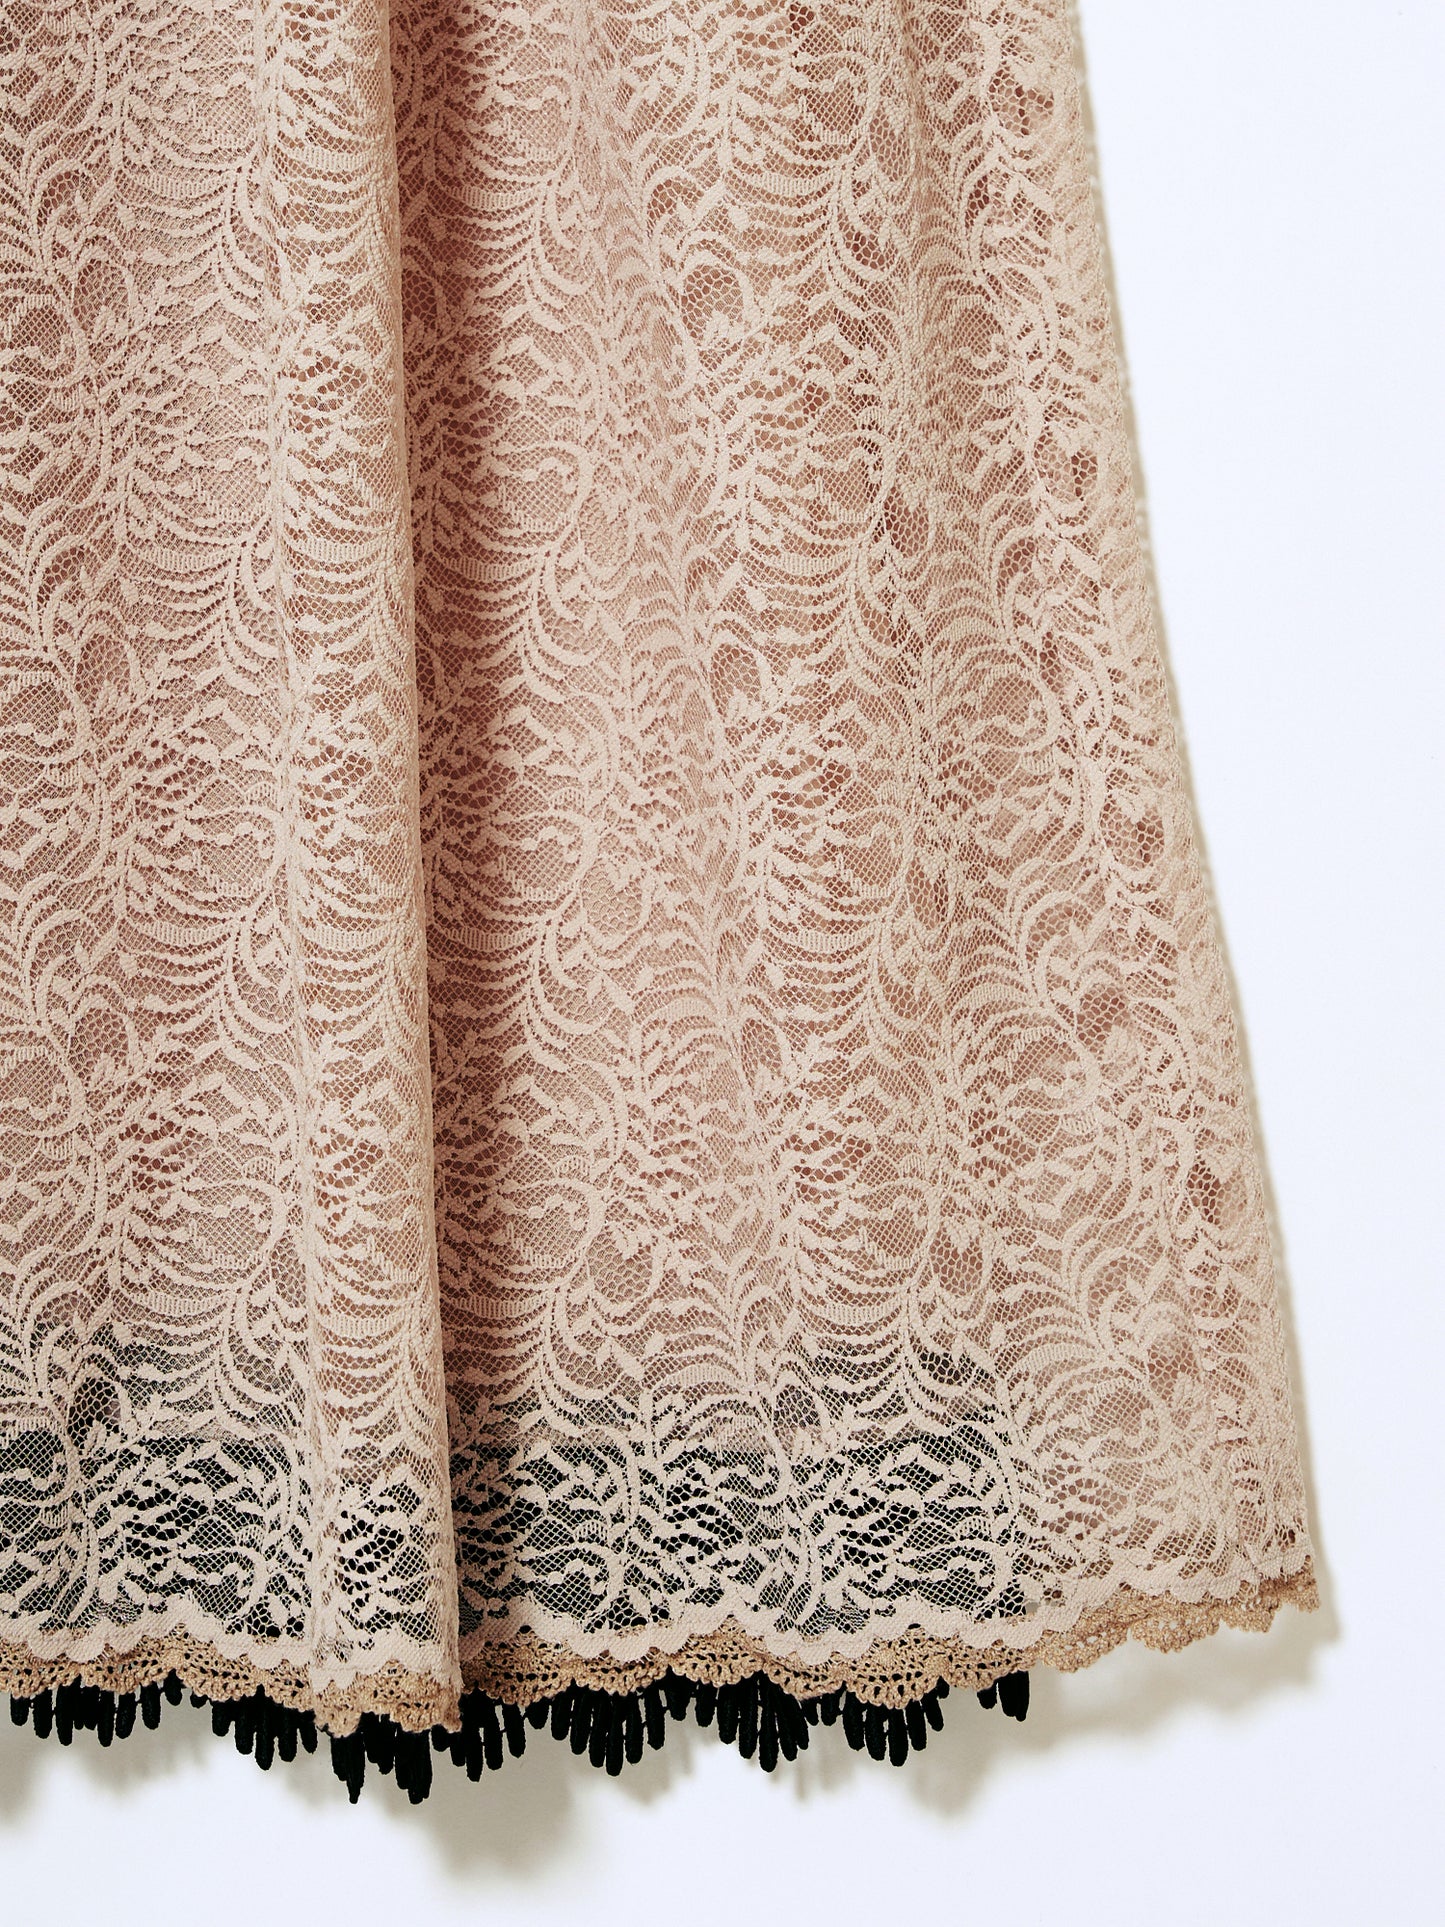 beige lace dress【Delivery in August 2023】